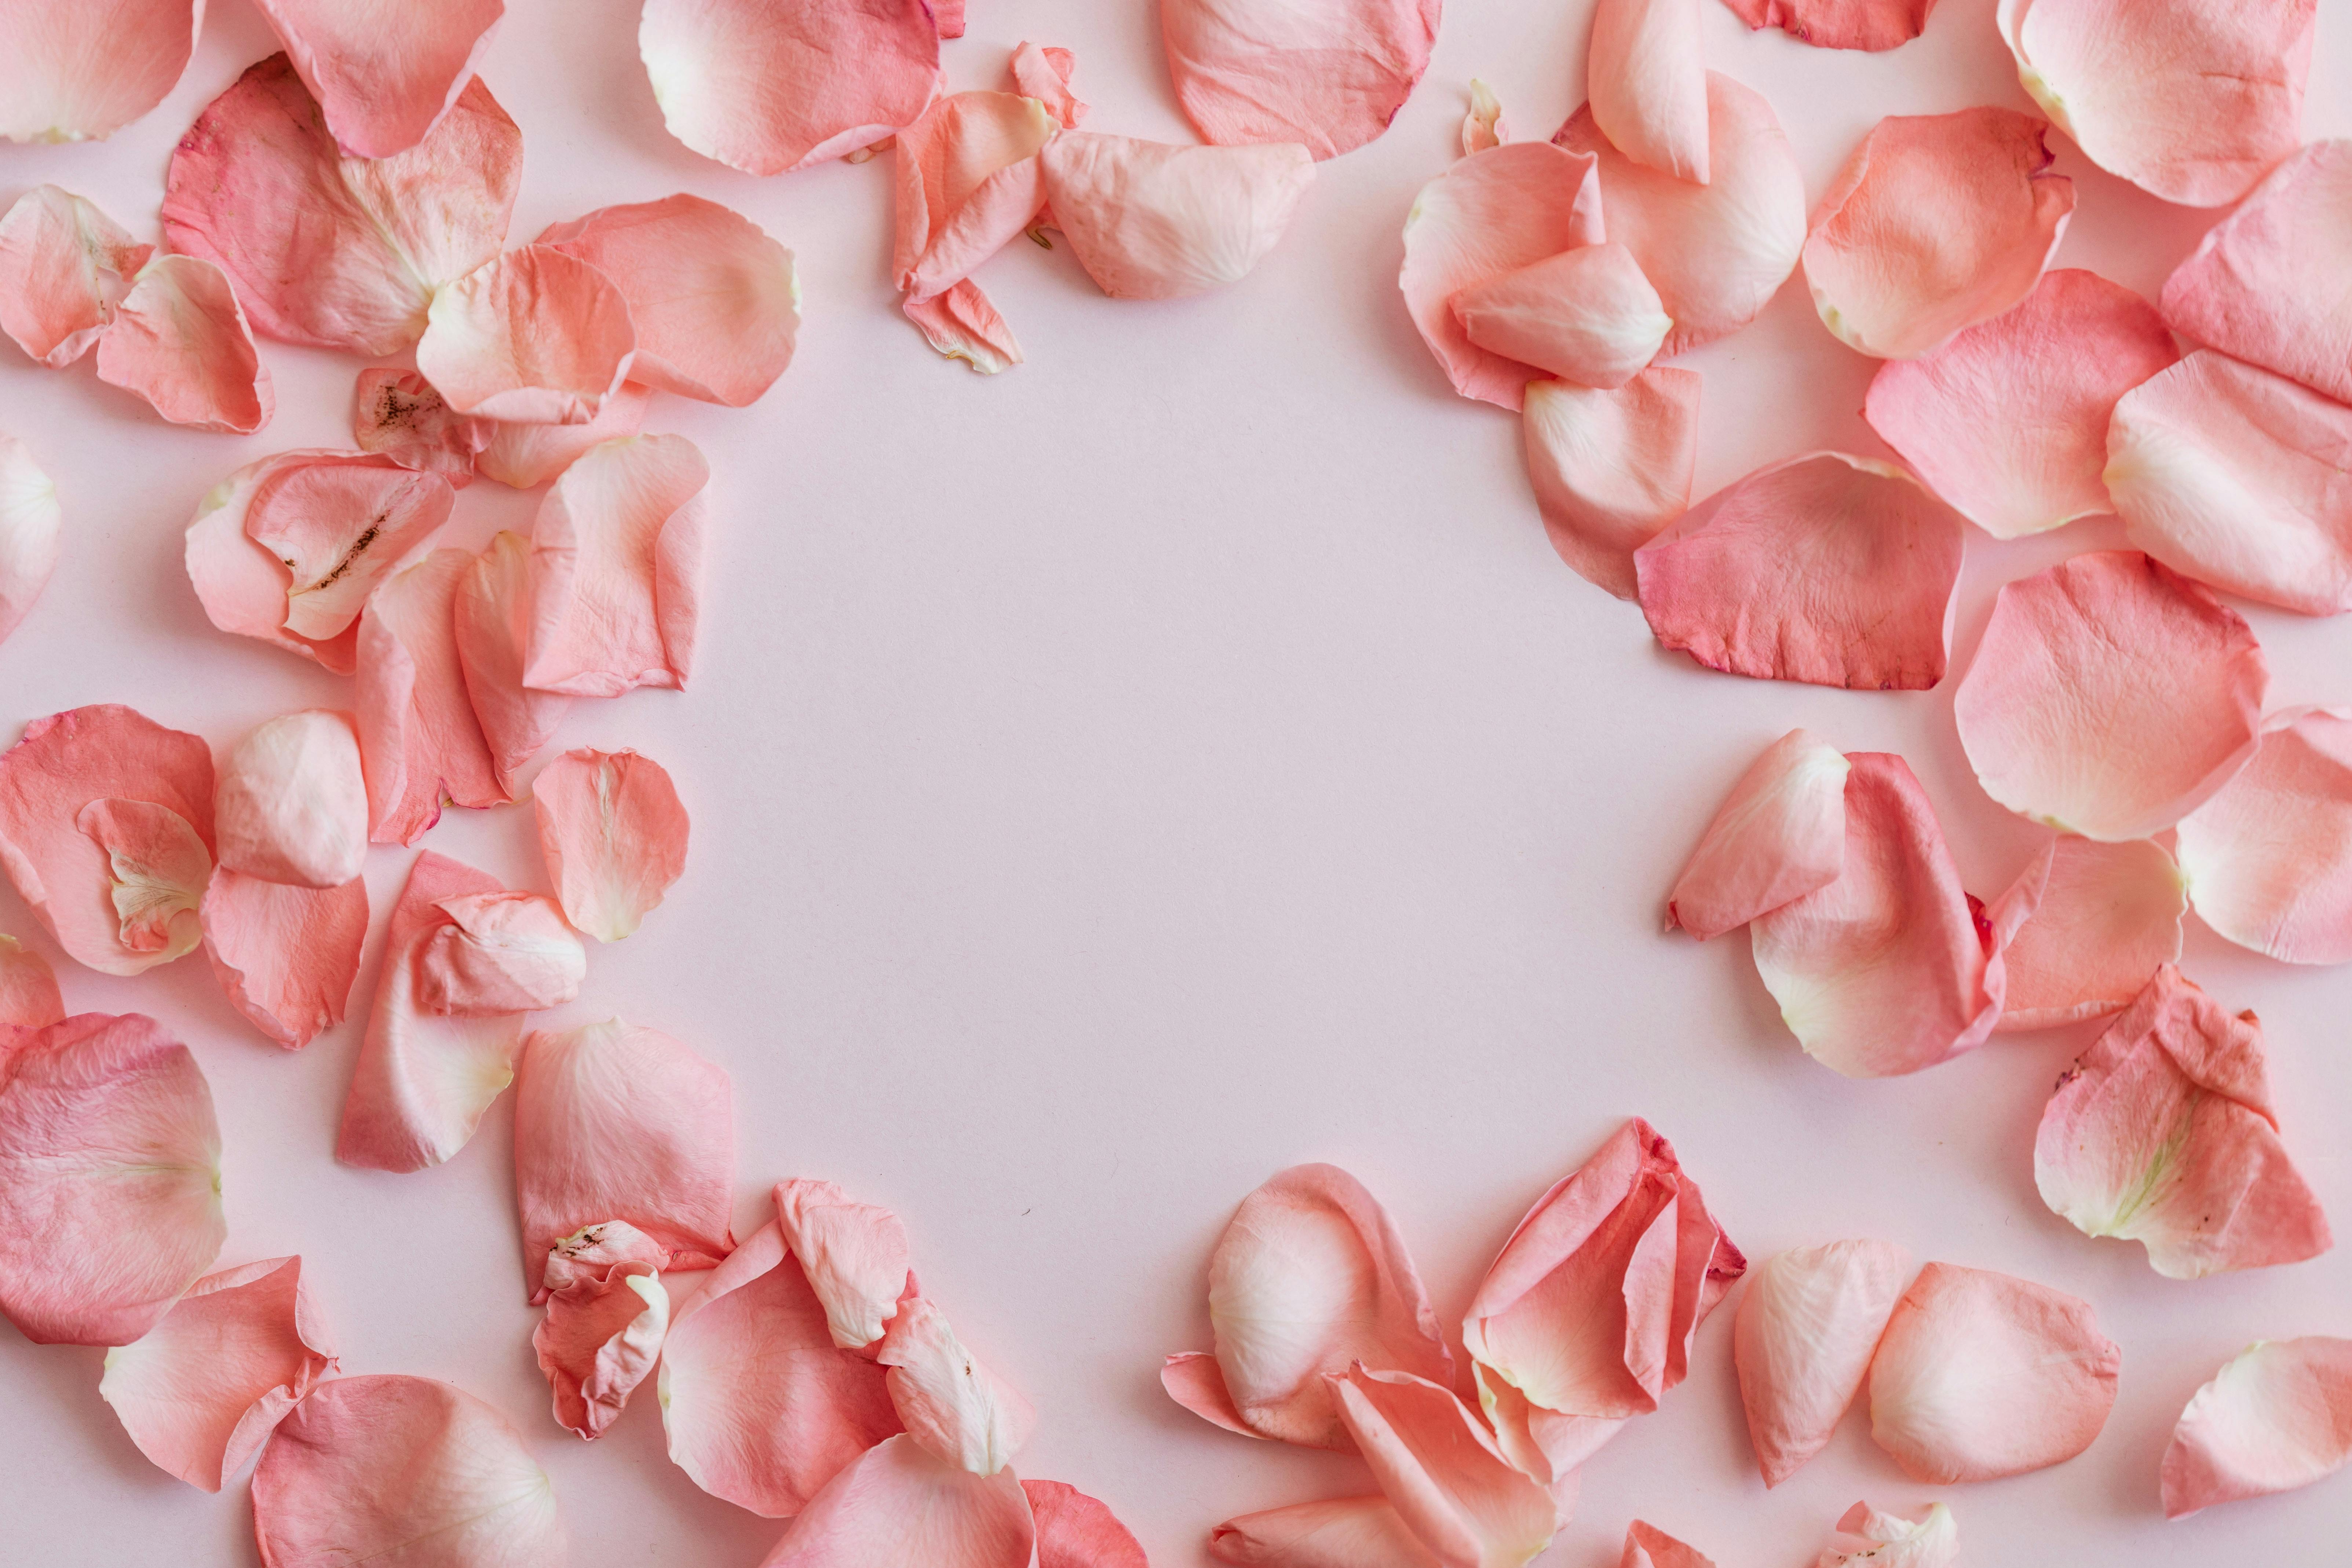 Roses and petals background. Roses and petals scattered on white  background, overhead view